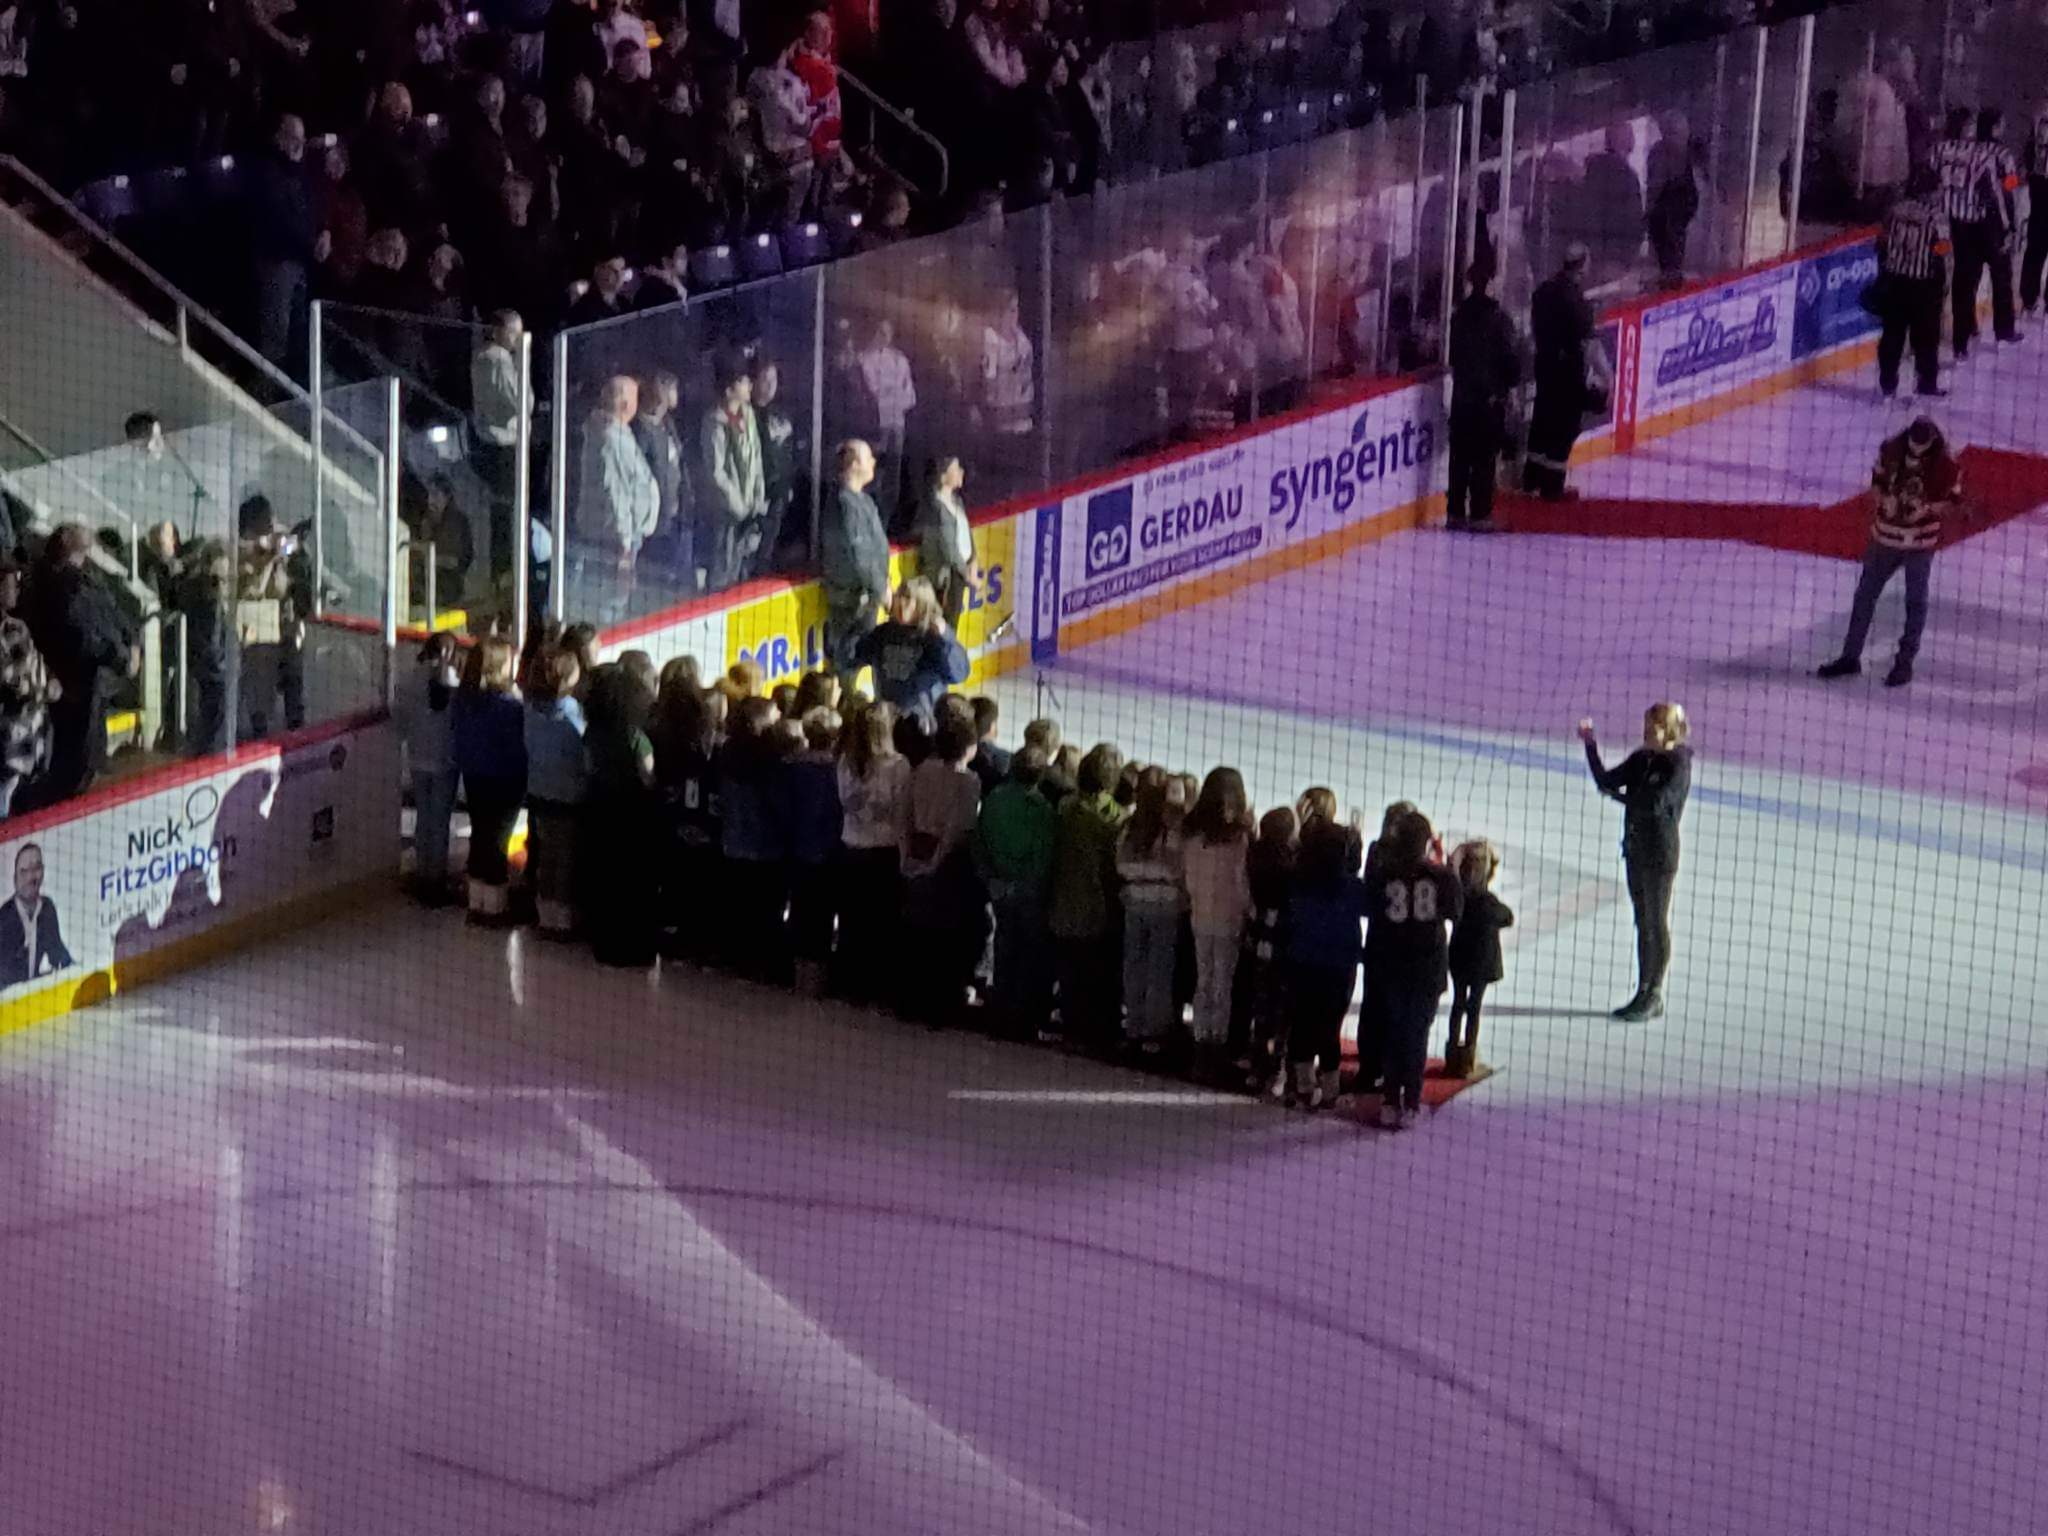 This photo features a group of elementary age students standing on the ice of a hockey rink, with their teacher to the side in front of a large audience.